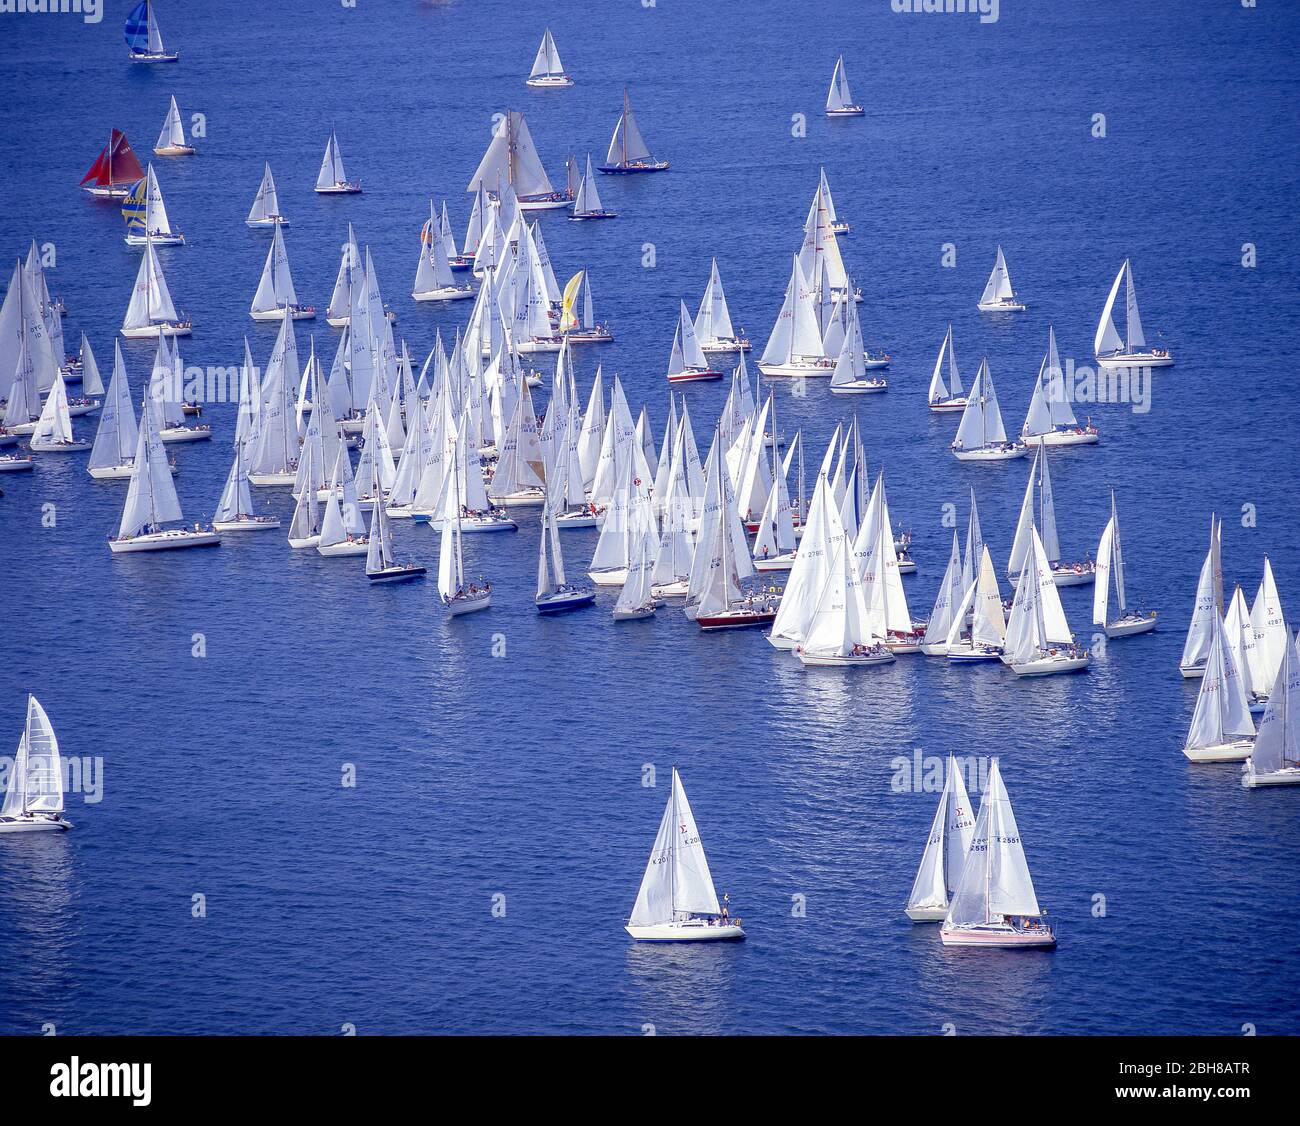 Cowes week yachting regatta, Cowes, Isle of Wight, Angleterre, Royaume-Uni Banque D'Images